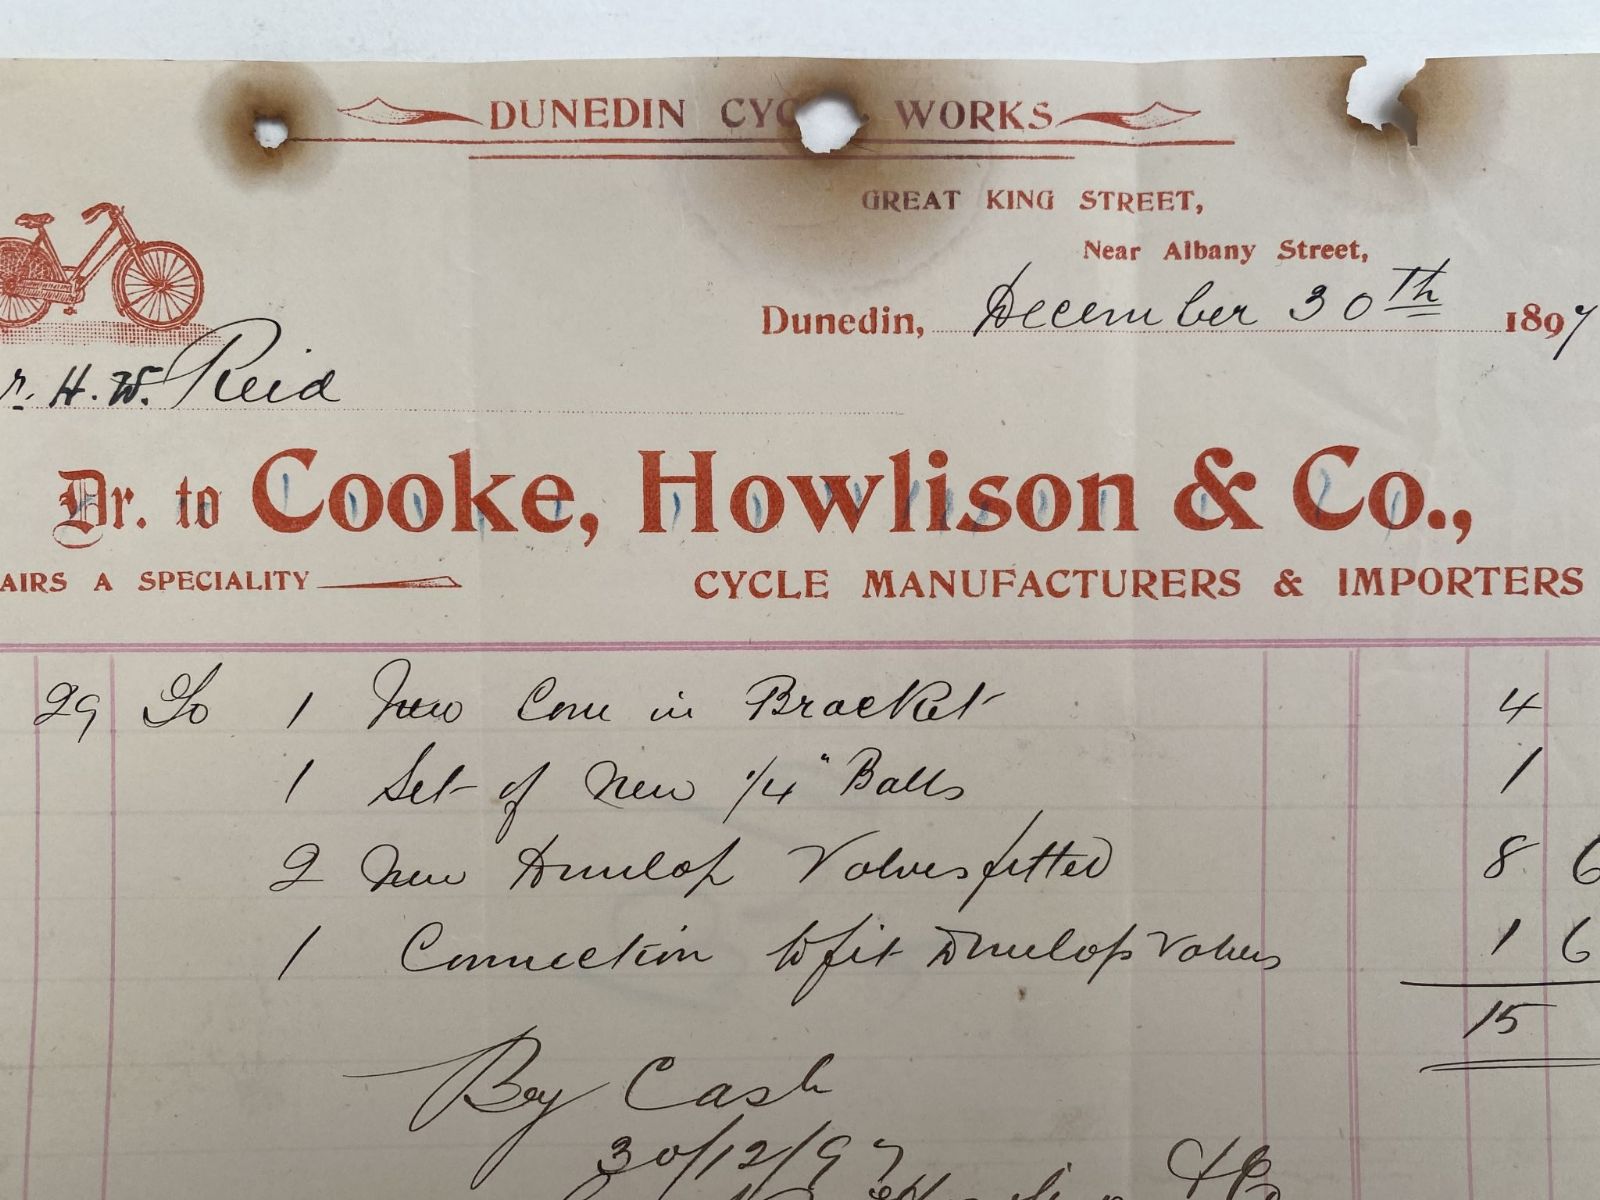 OLD INVOICE: Cooke, Howlinson & Co. - Cycle Manufacturers, Dunedin 1897 (125 yo)